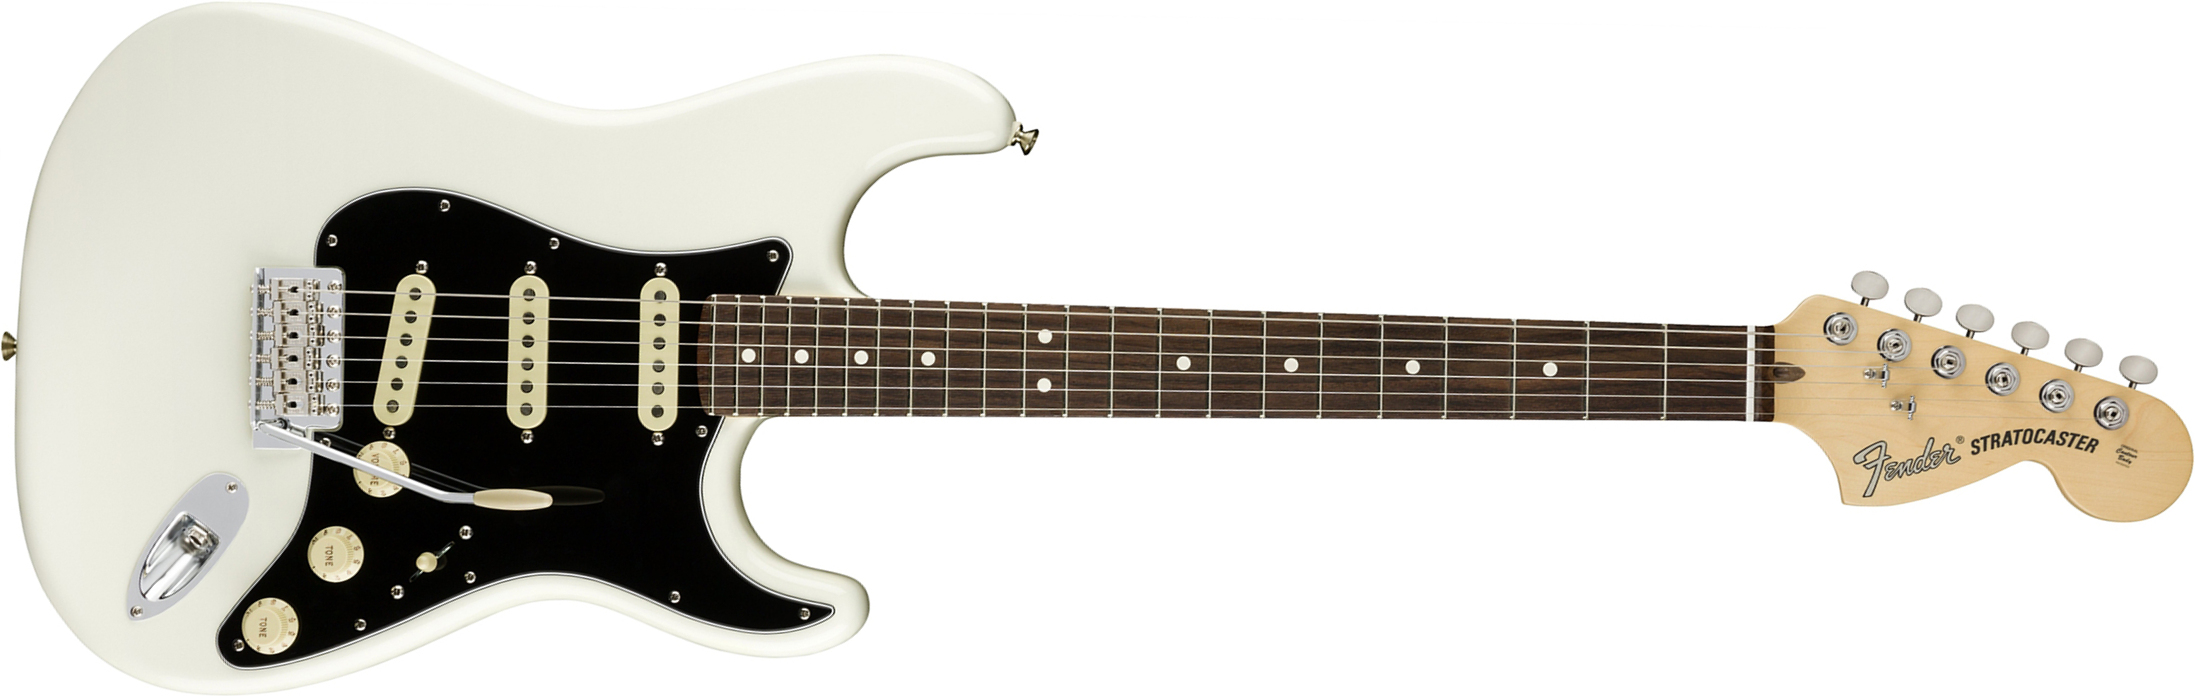 Fender Strat American Performer Usa Sss Rw - Arctic White - Str shape electric guitar - Main picture